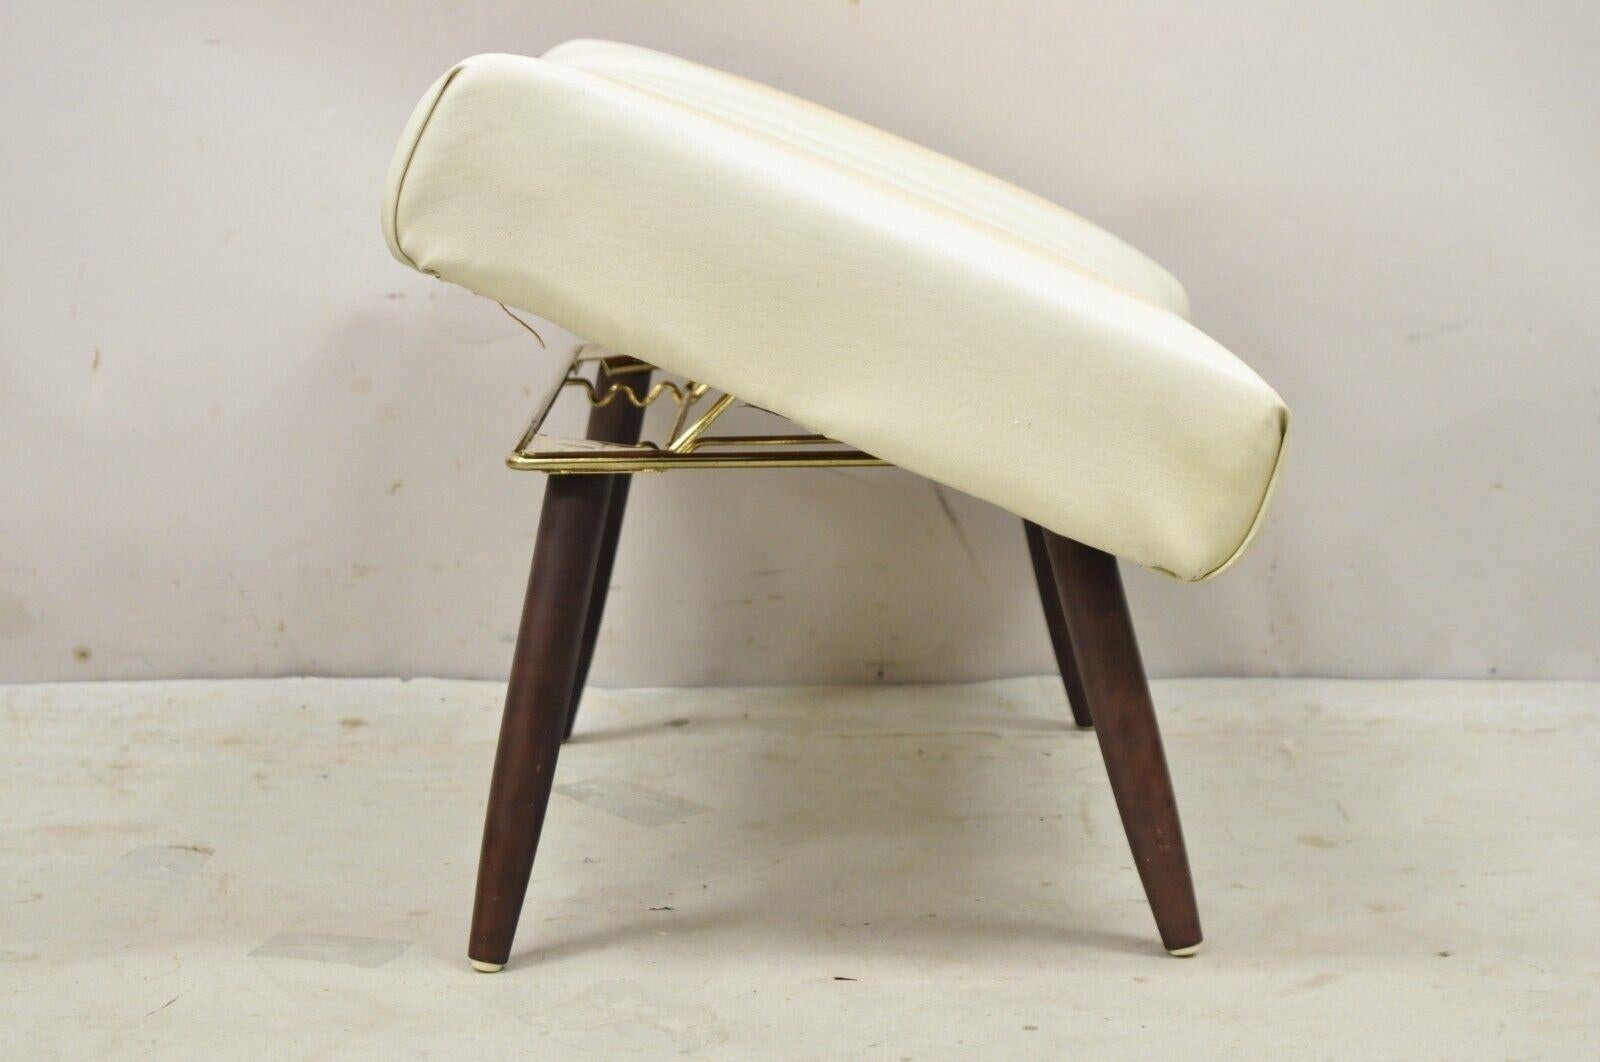 Vintage Mid-Century Modern Adjustable Angle Ottoman Footstool with Wooden Legs For Sale 1